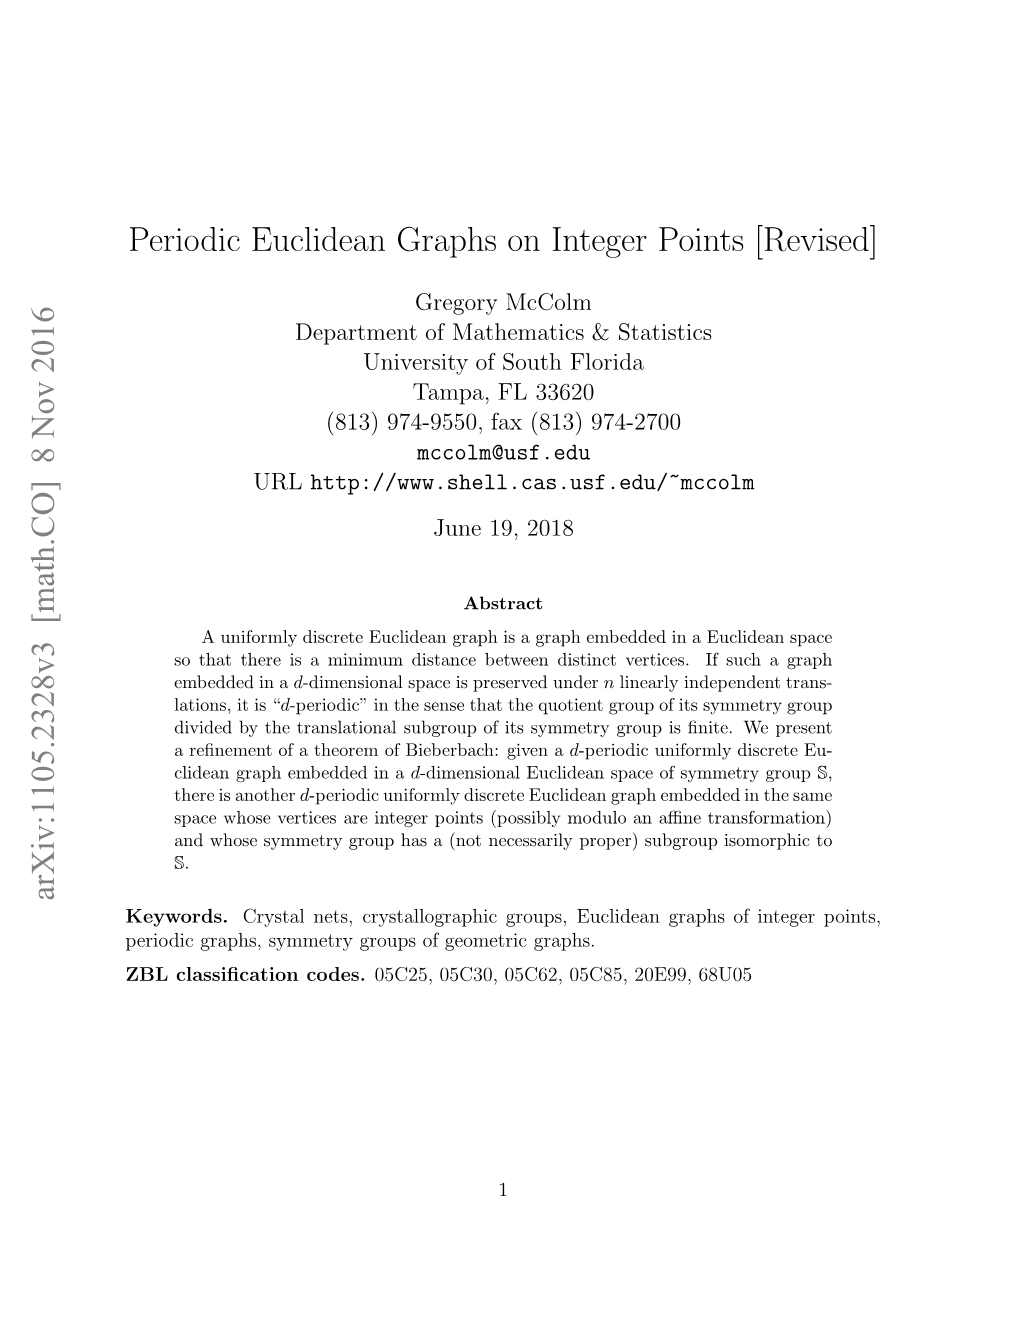 Periodic Euclidean Graphs on Integer Points